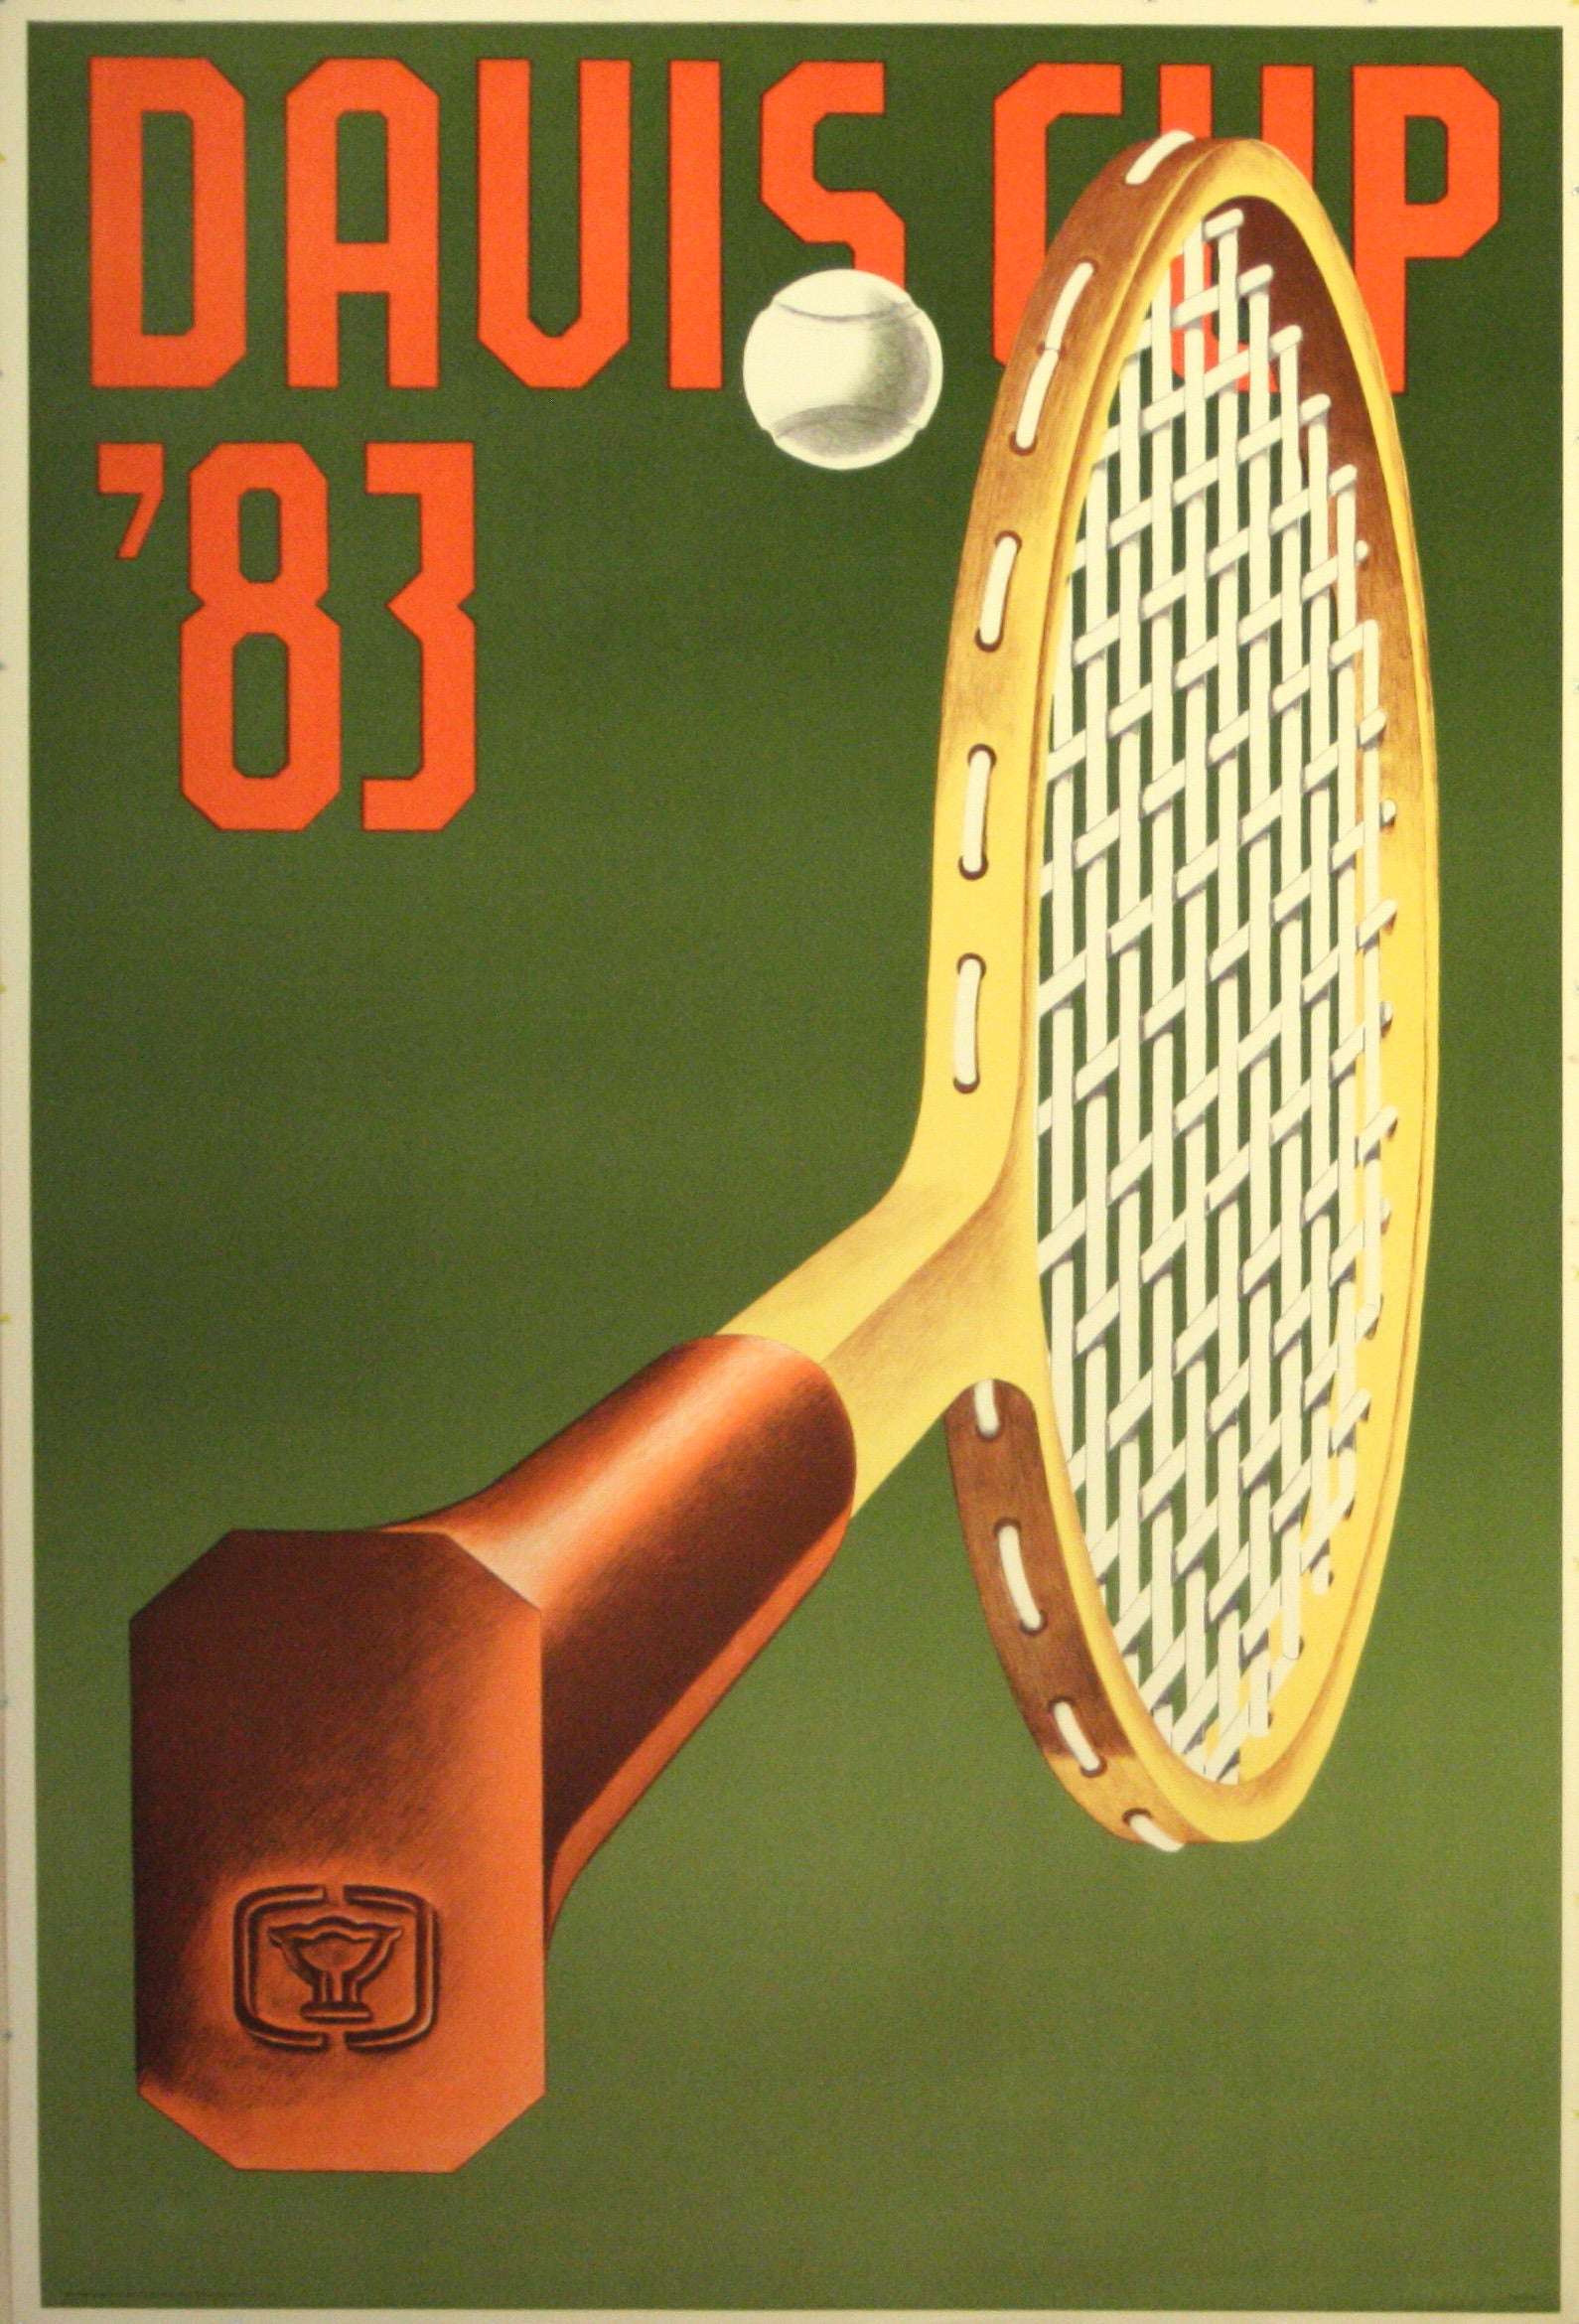 Original Vintage Sport Poster for the 1983 Davis Cup Featuring a Tennis Racket